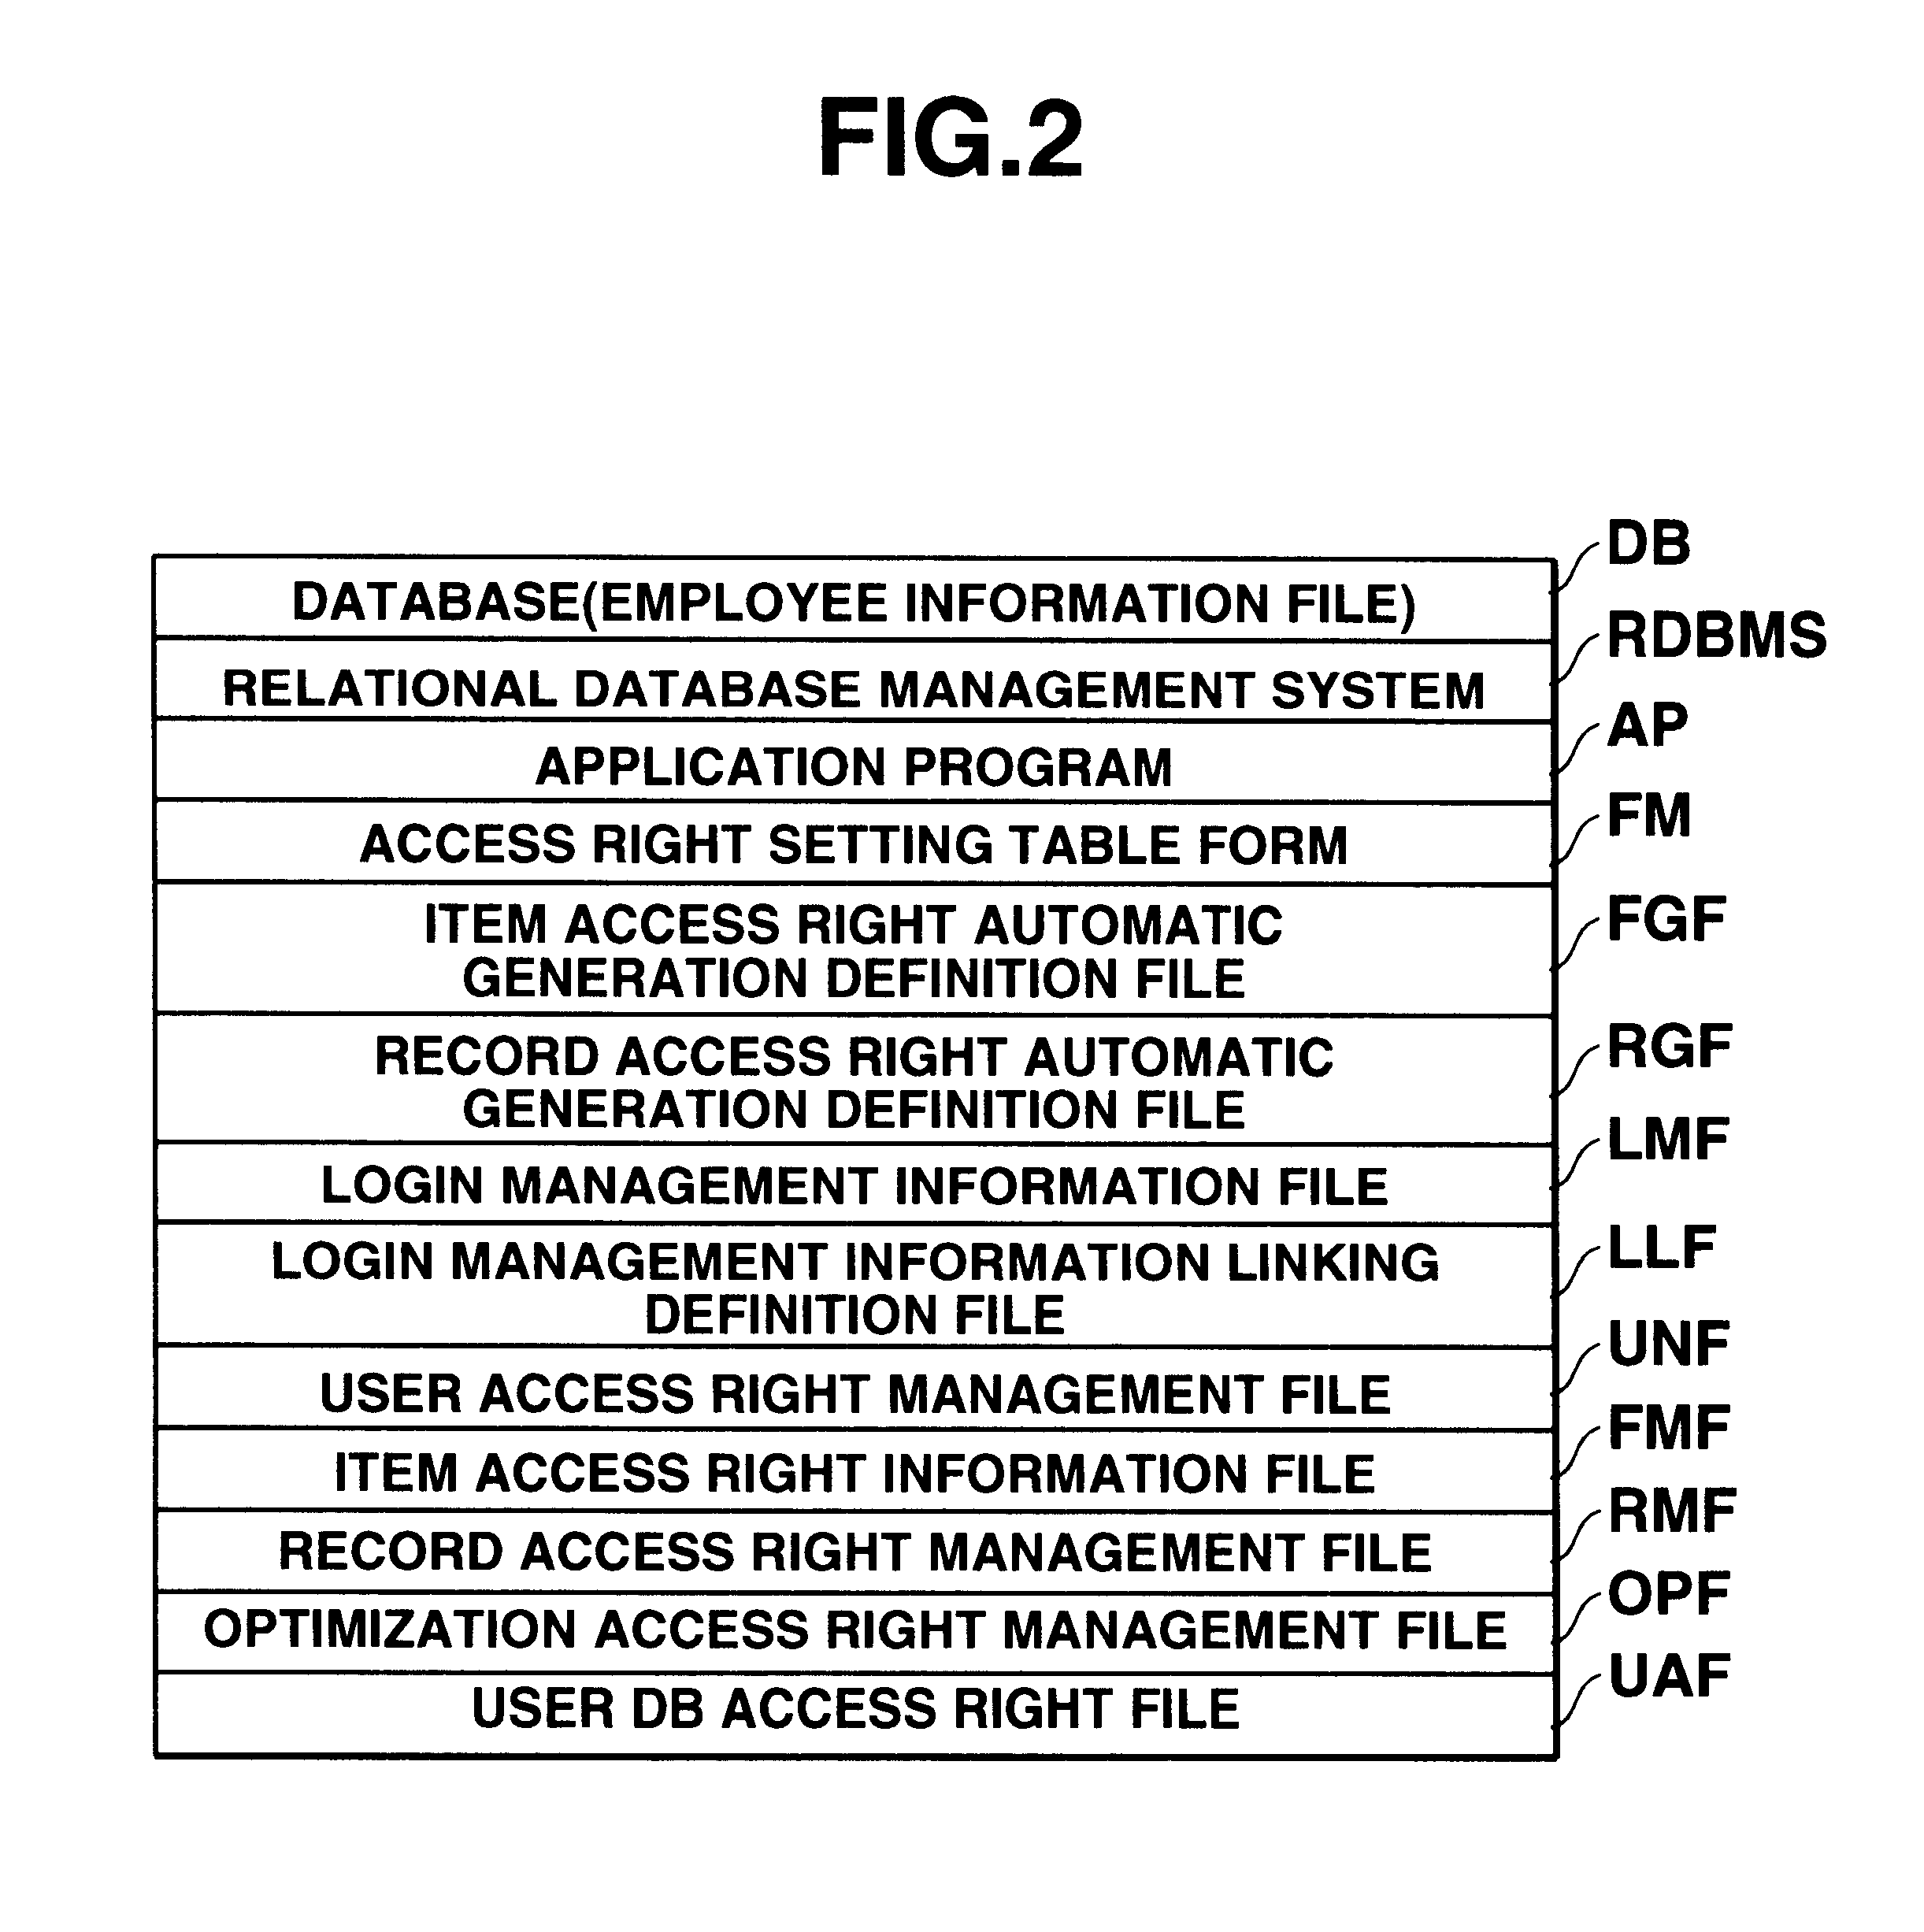 Data access control apparatus for limiting data access in accordance with user attribute